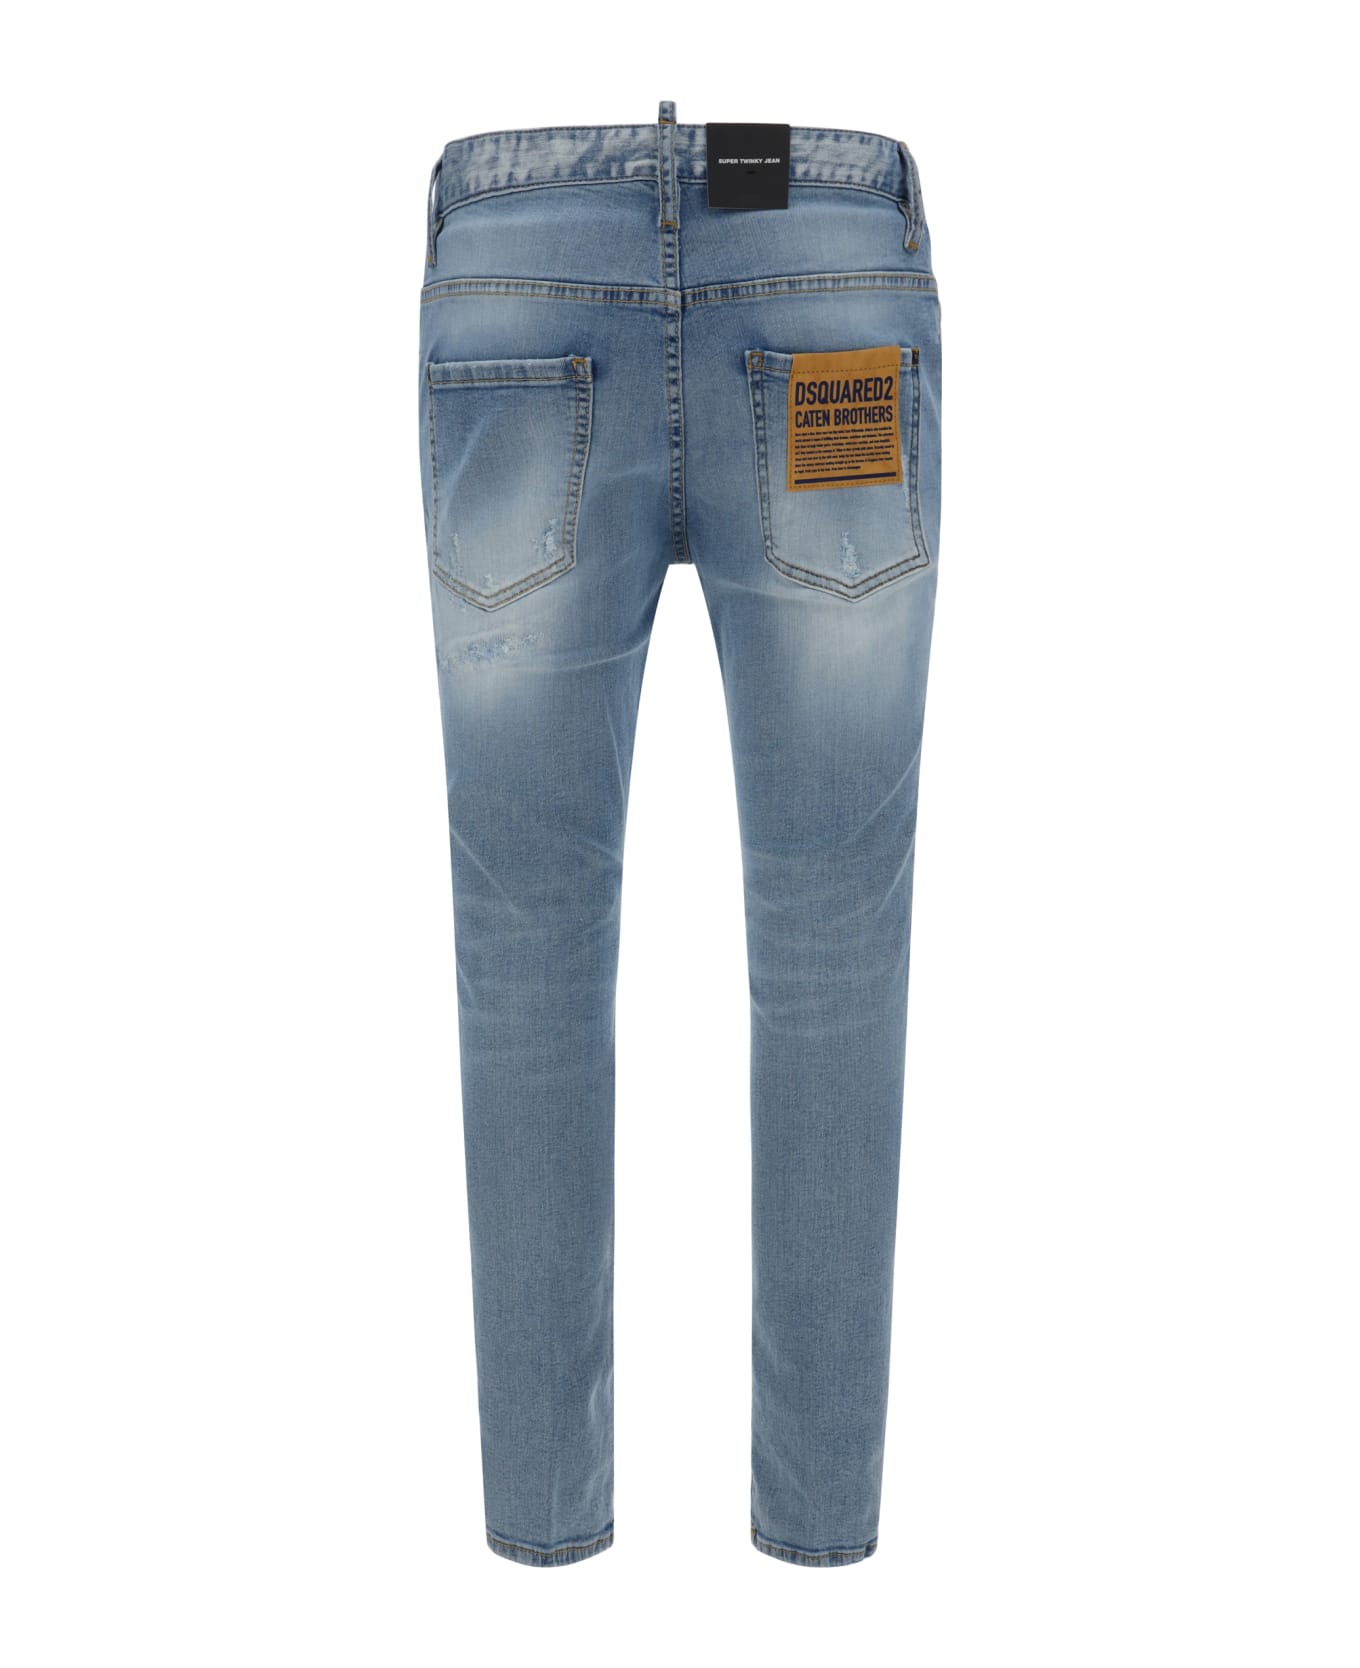 Dsquared2 Super Twinky Jeans - 470